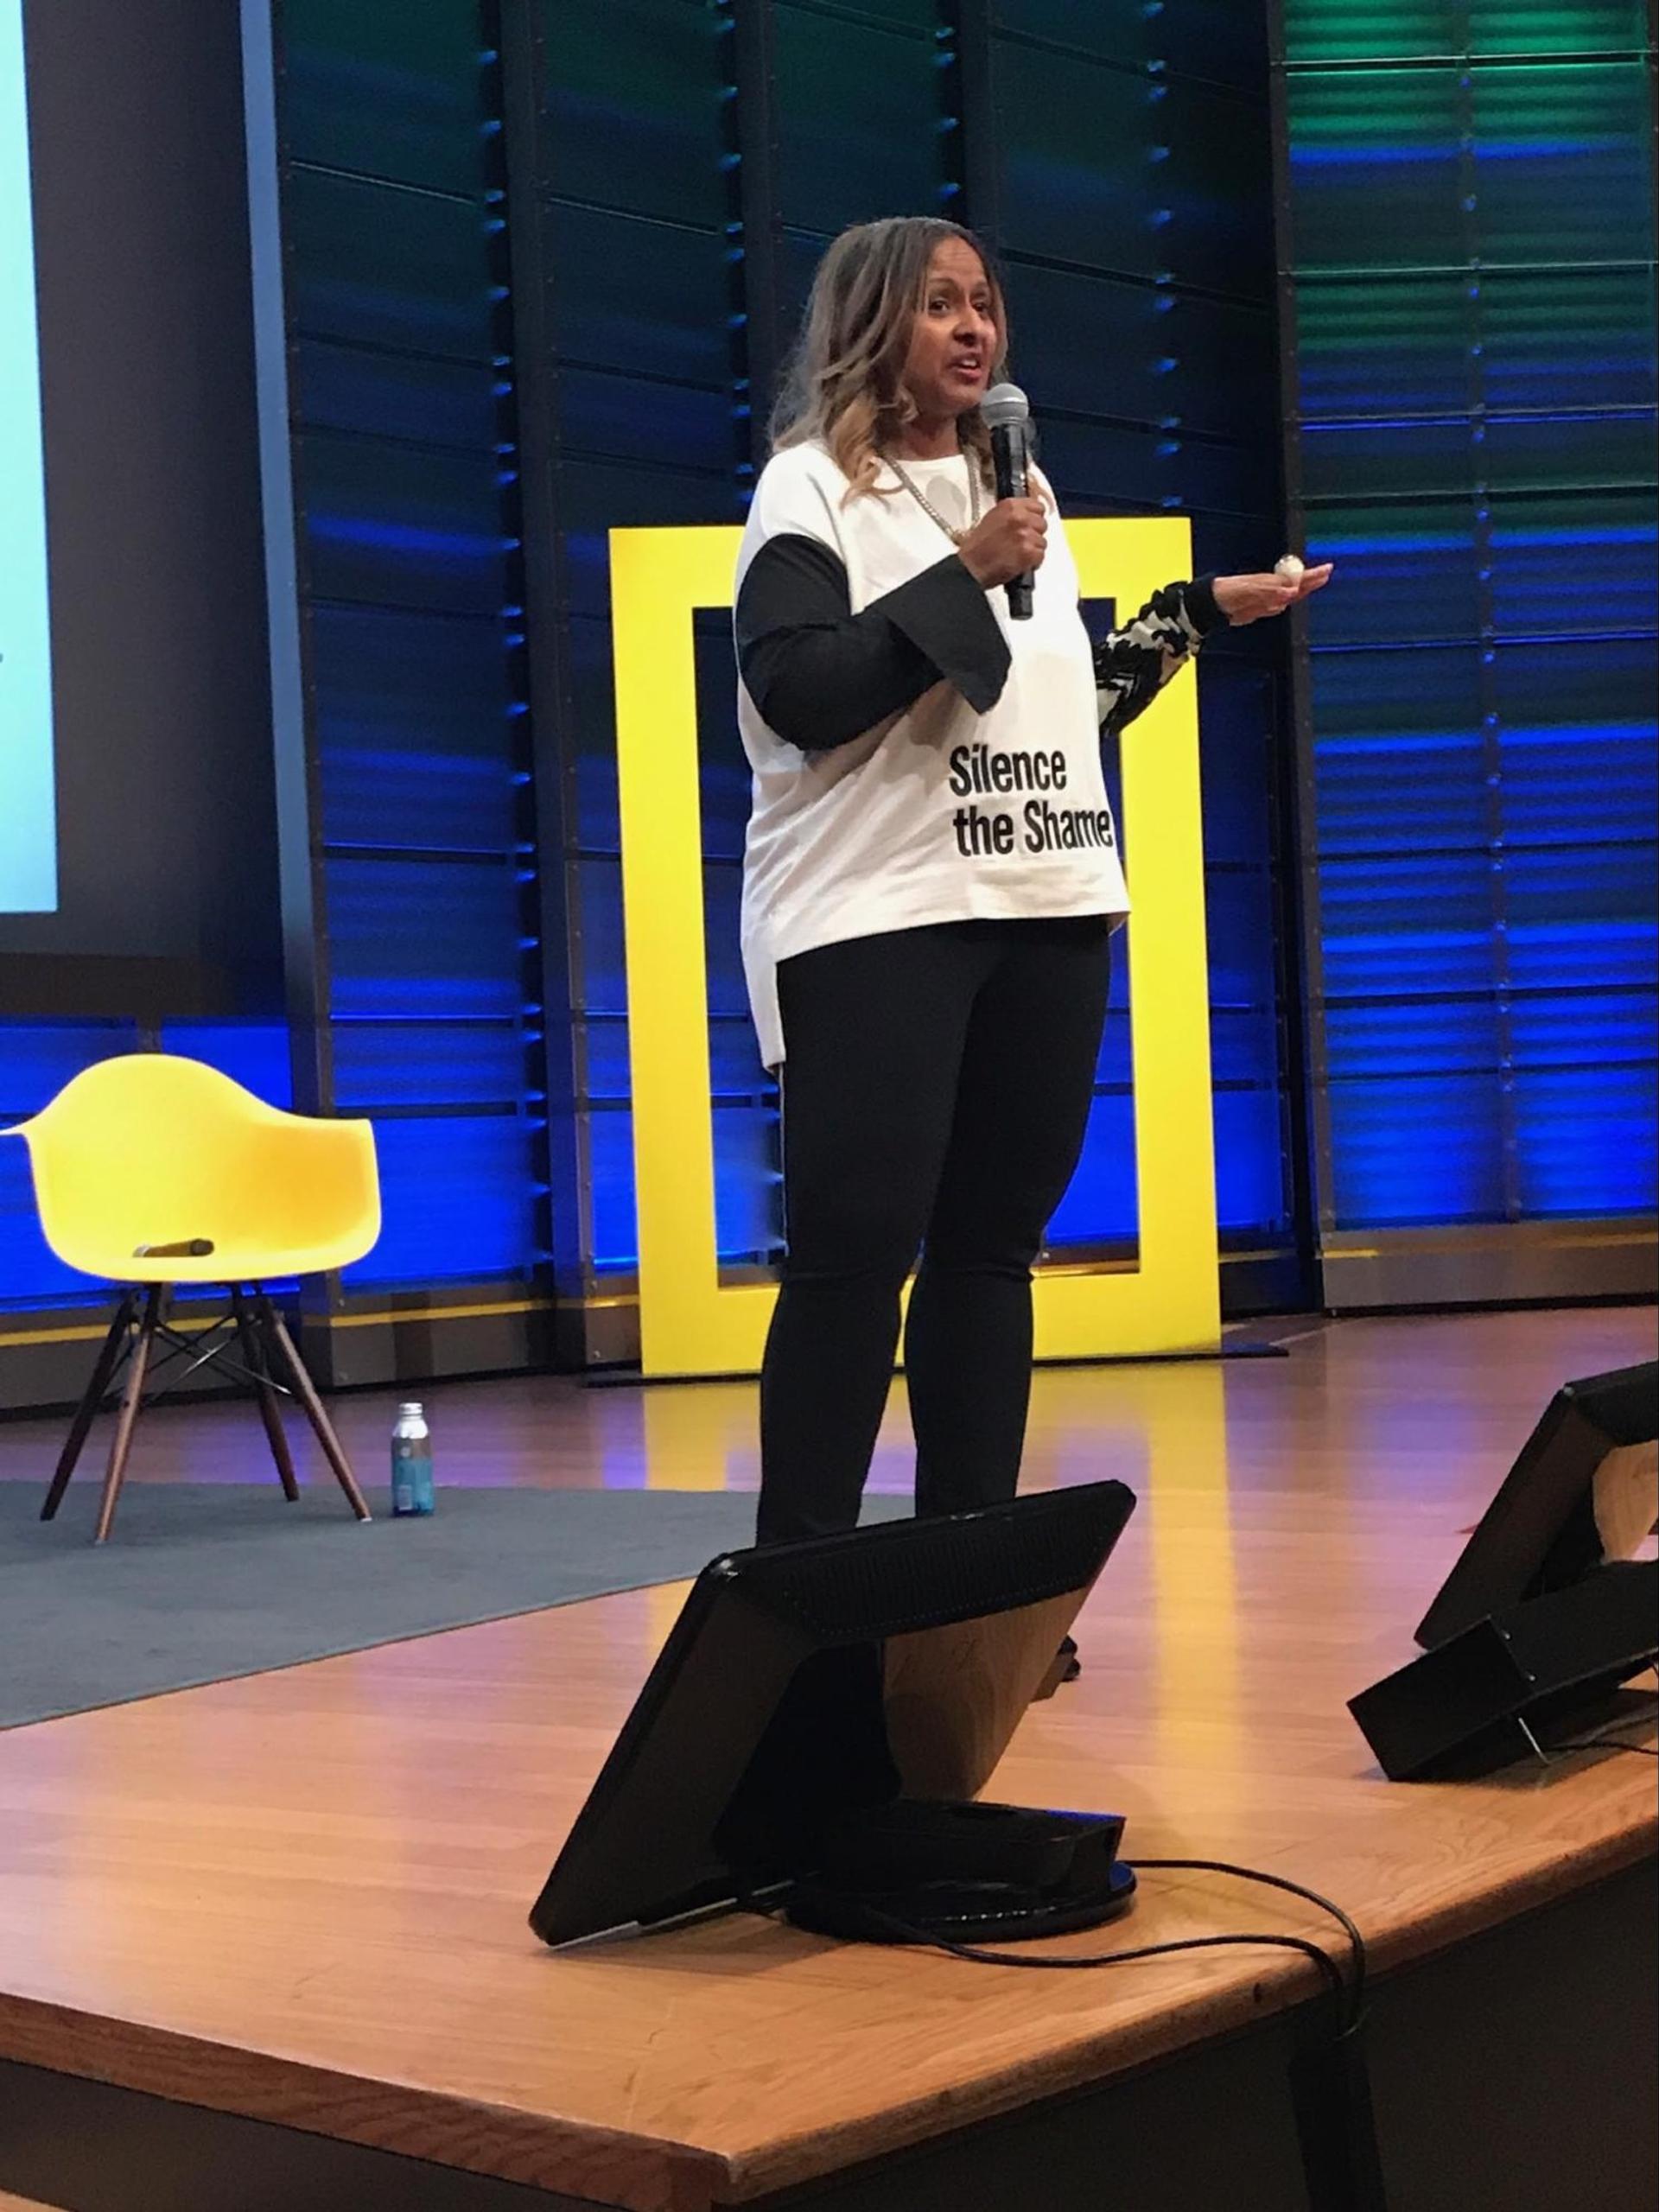 Shanti Das speaking at the National Geographic headquarters in 2019